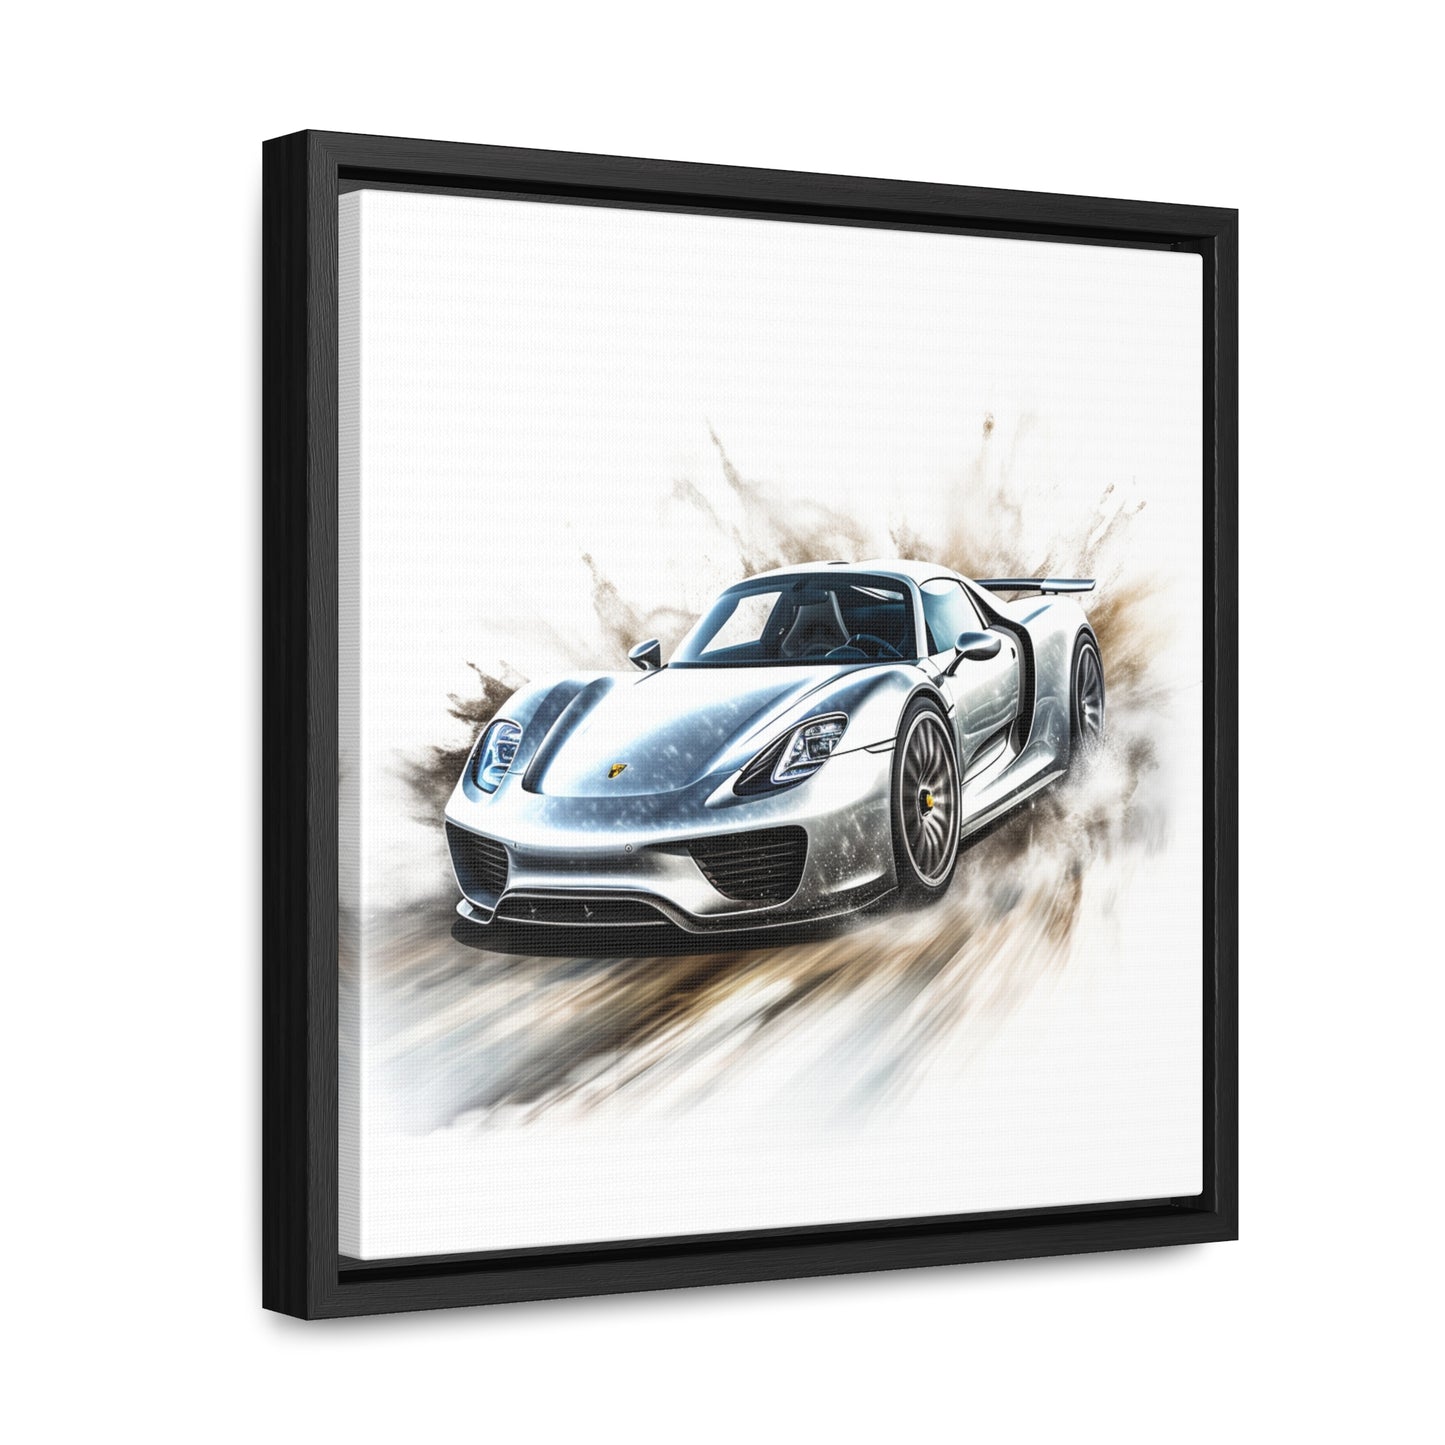 Gallery Canvas Wraps, Square Frame 918 Spyder white background driving fast with water splashing 2